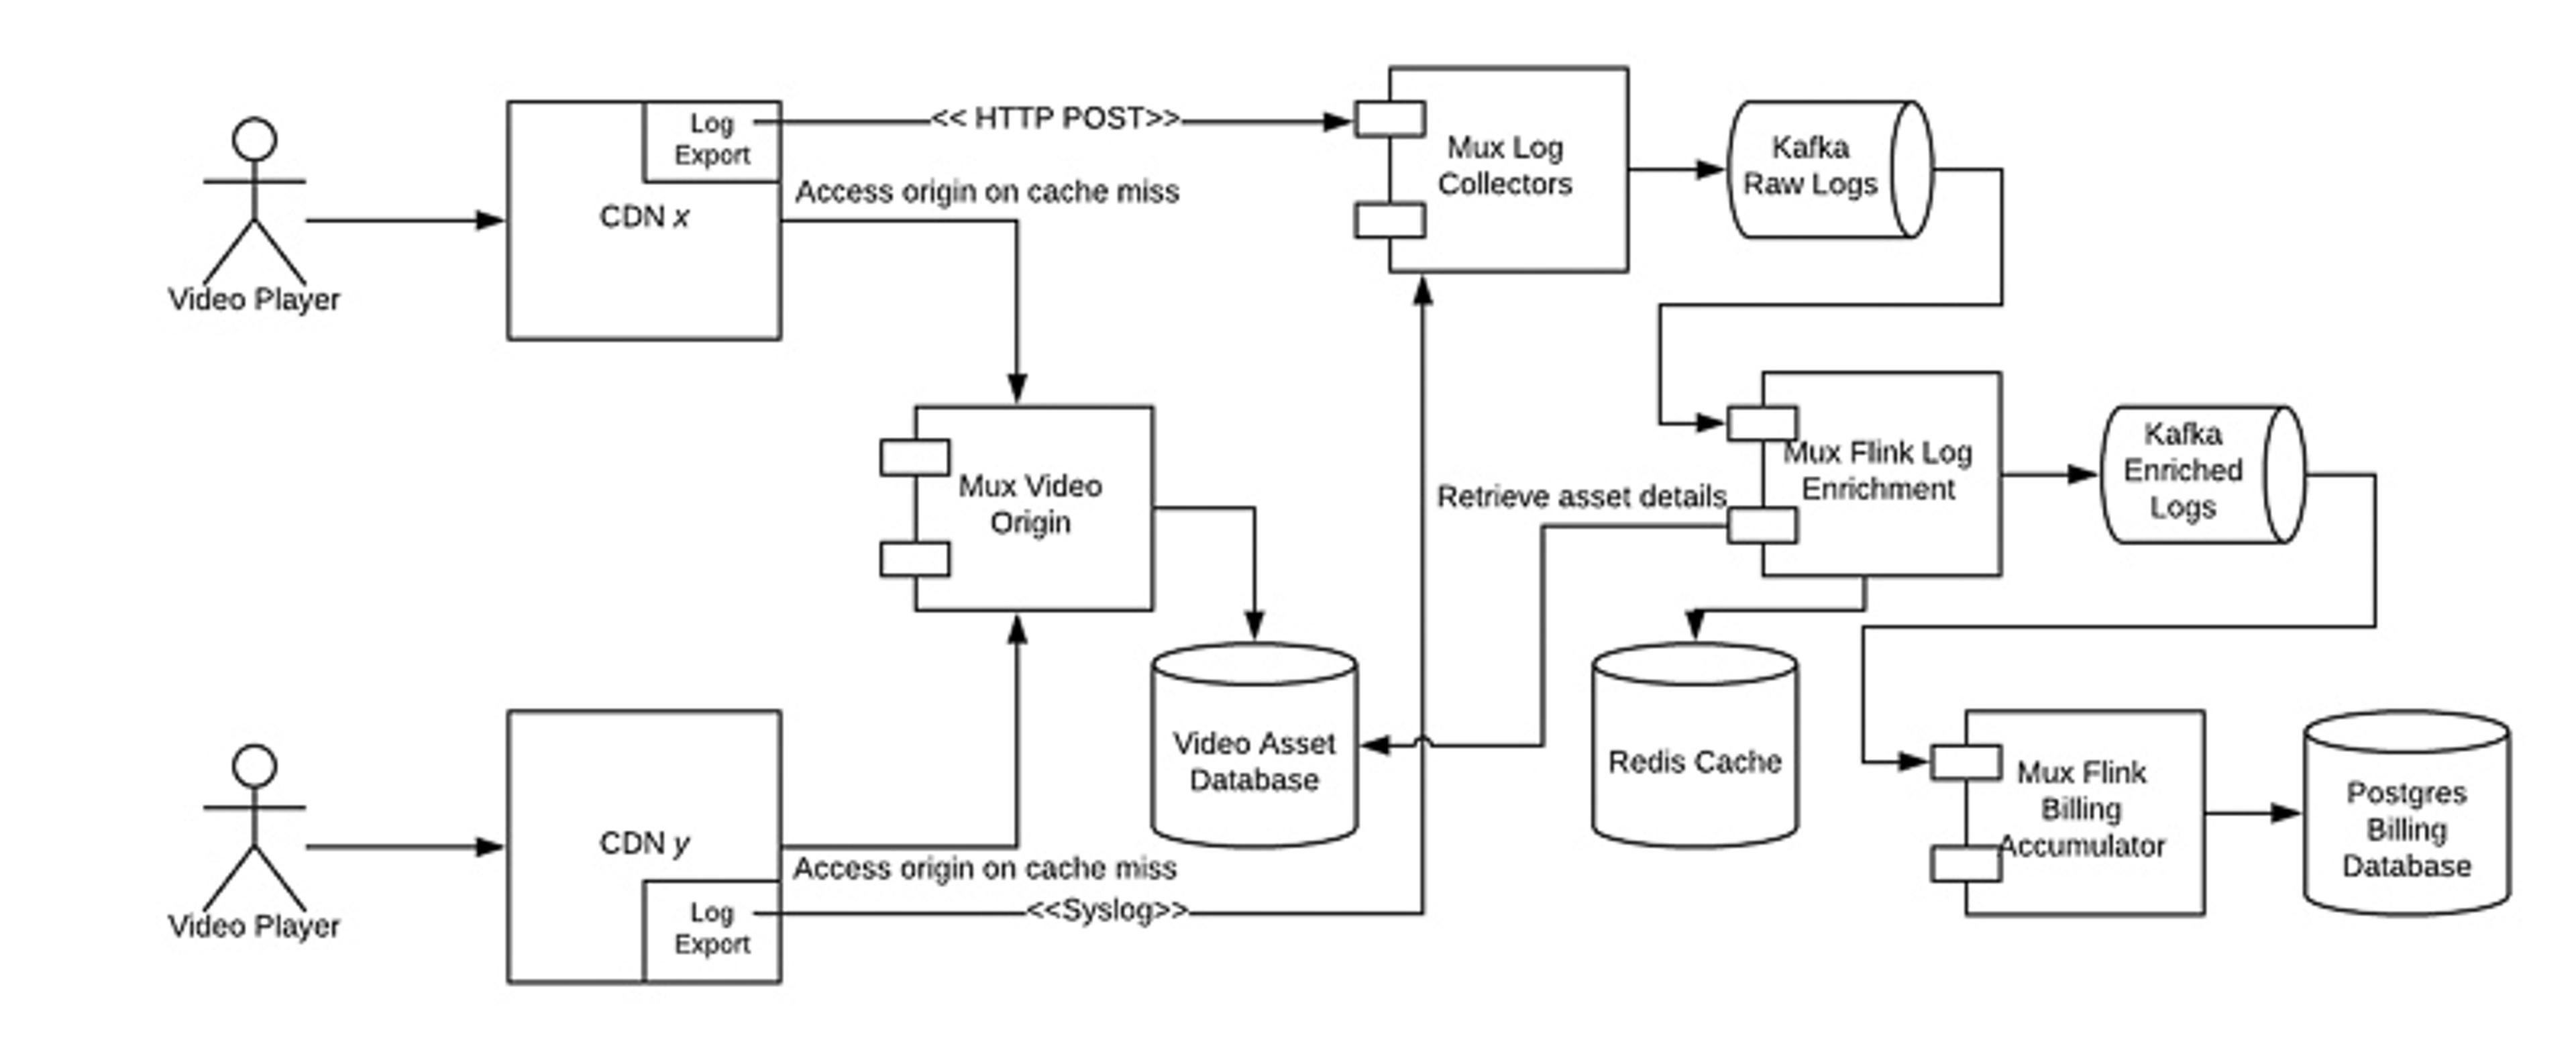 Mux Access Log Processing System Architecture